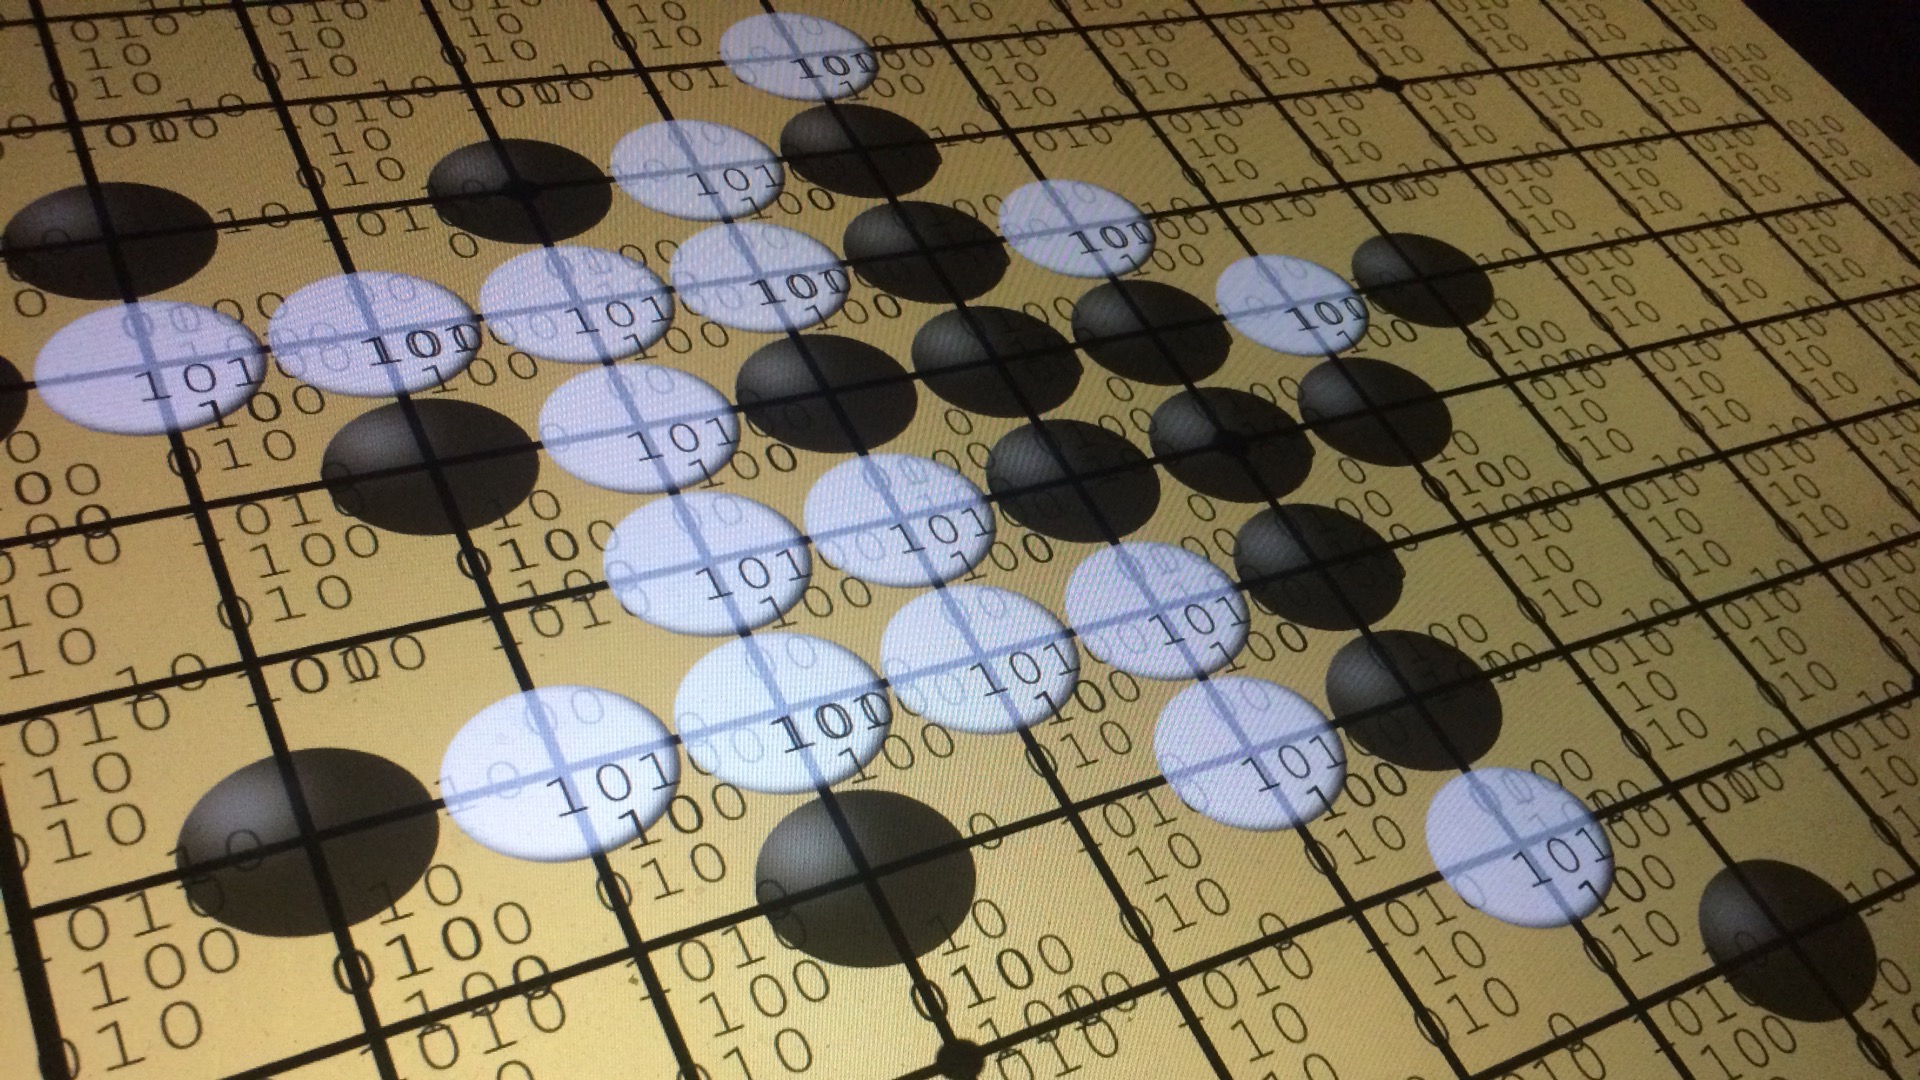 Matrix-like view over the gomoku example with counters visible